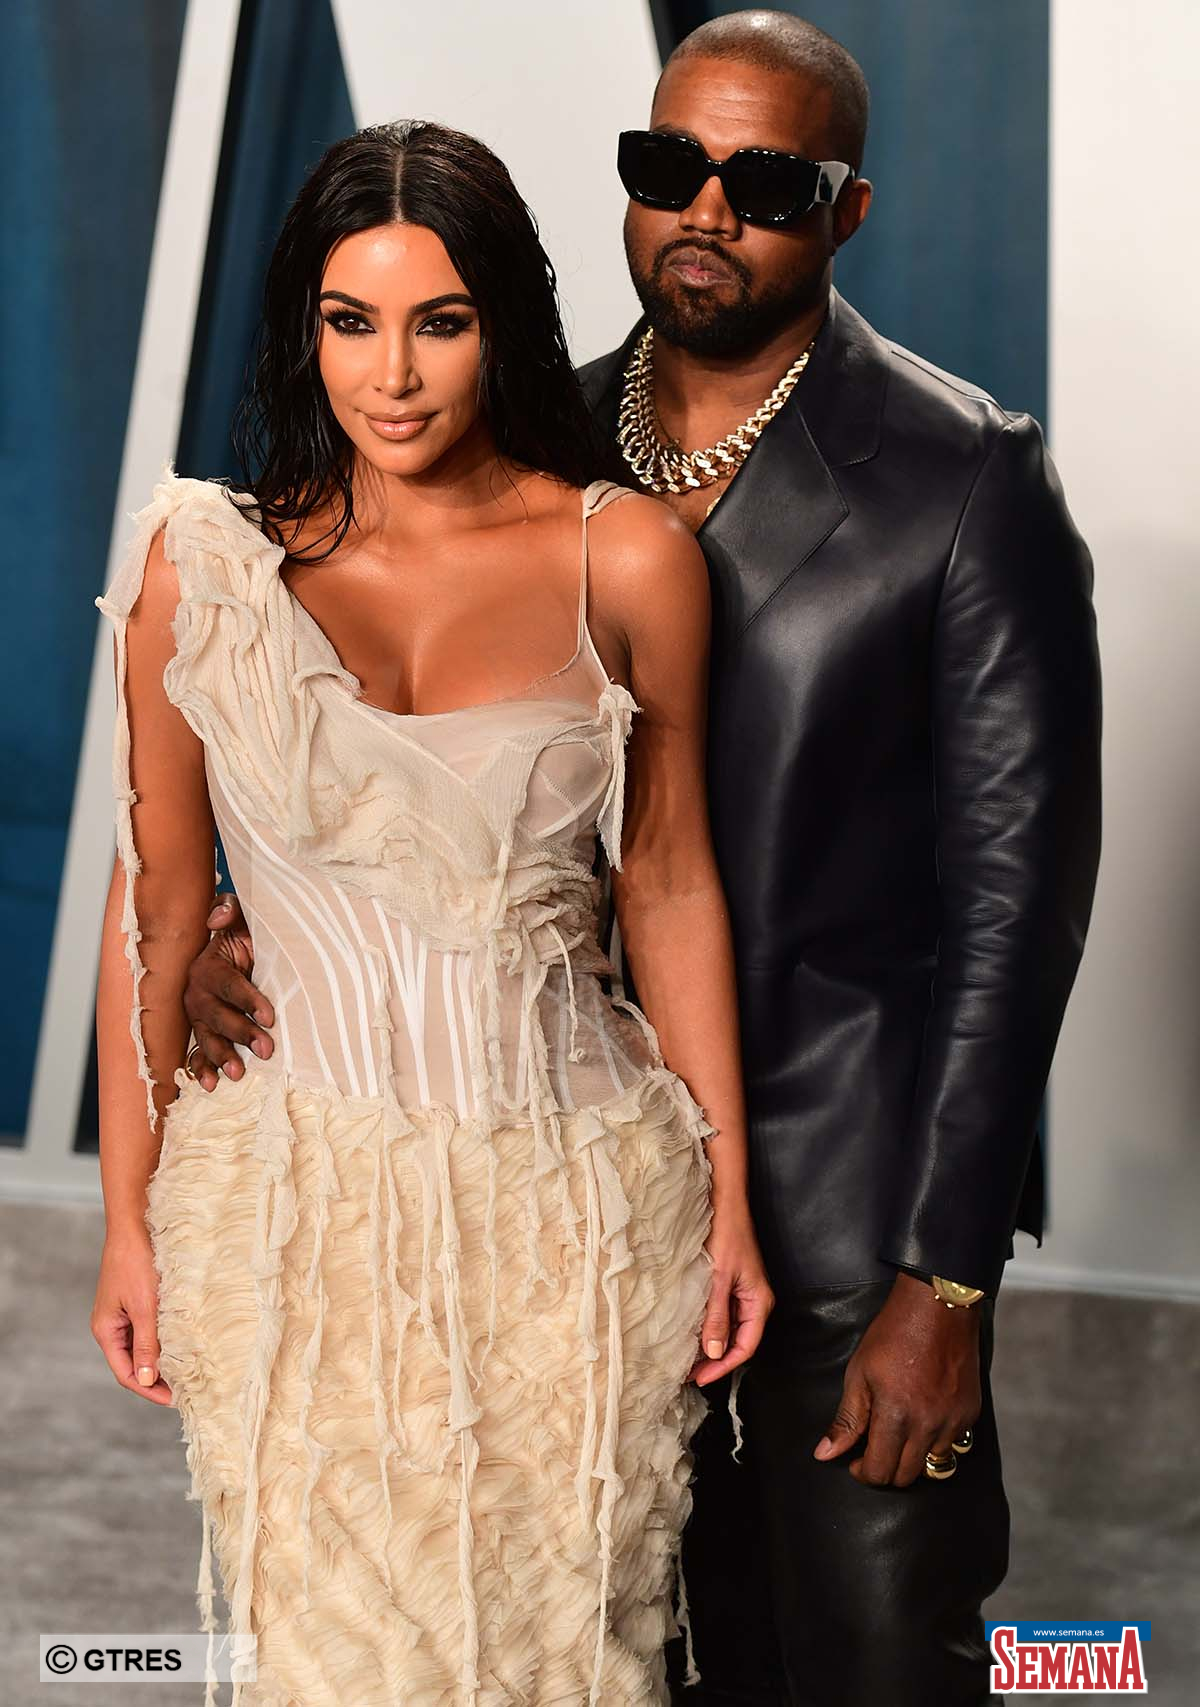 Kim Kardashian and singer Kanye West attending the Vanity Fair Oscar Party 2020  on February 9, 2020 in Beverly Hills, CA.